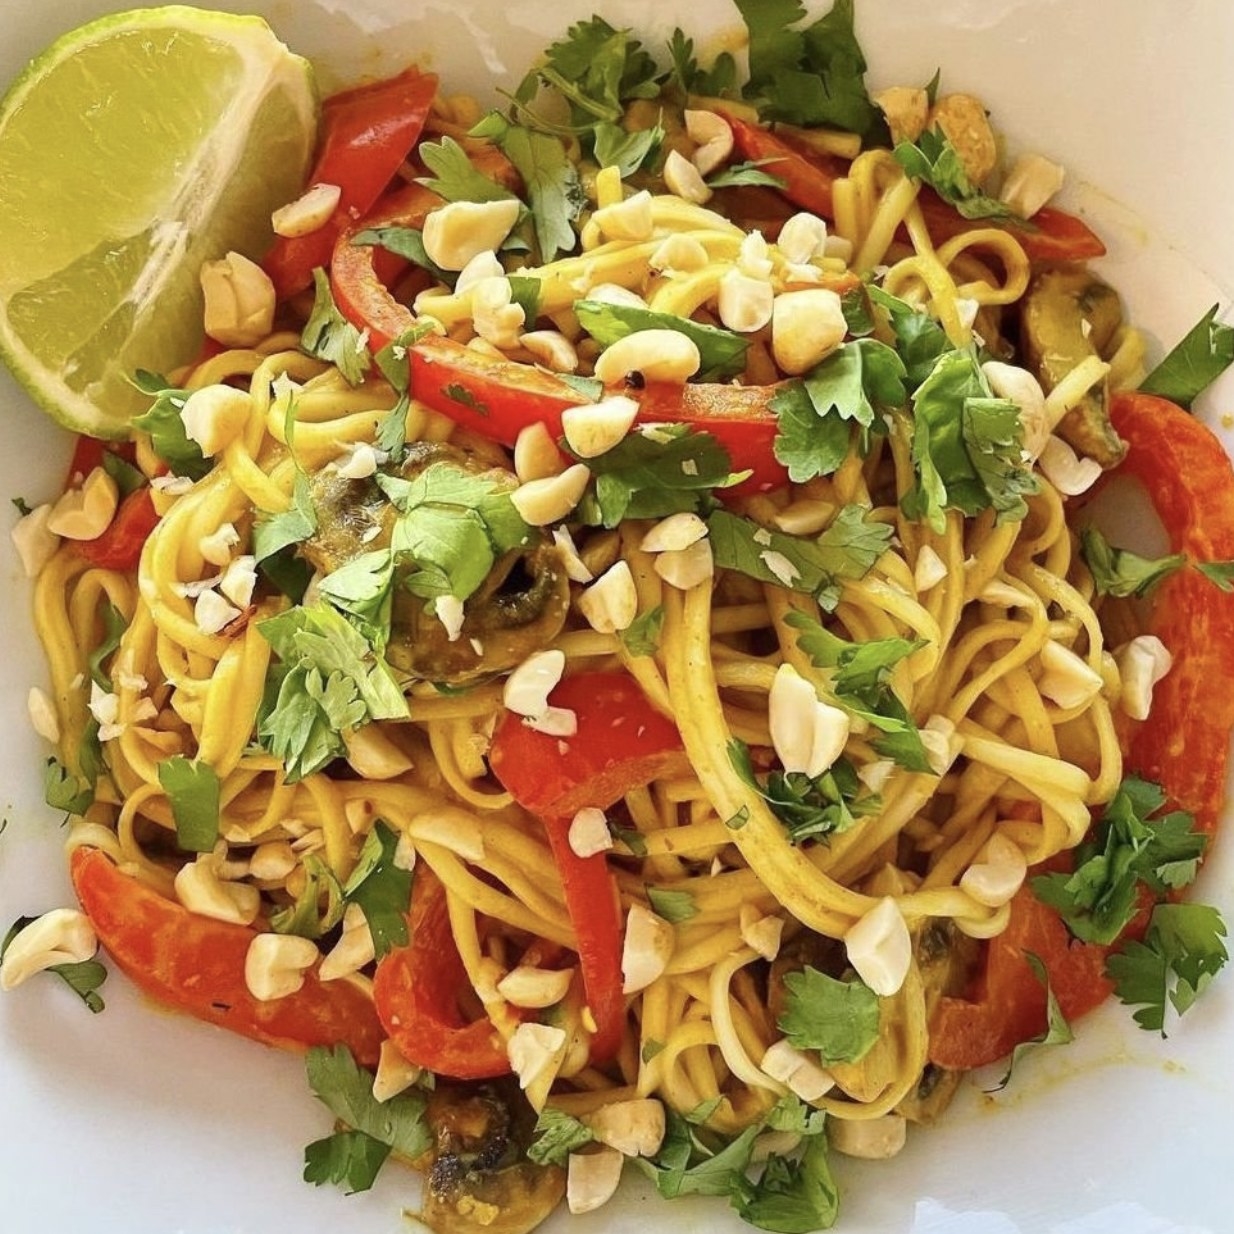 plate of fresh pasta dish with bell pepper, peanuts and cilantro in sauce